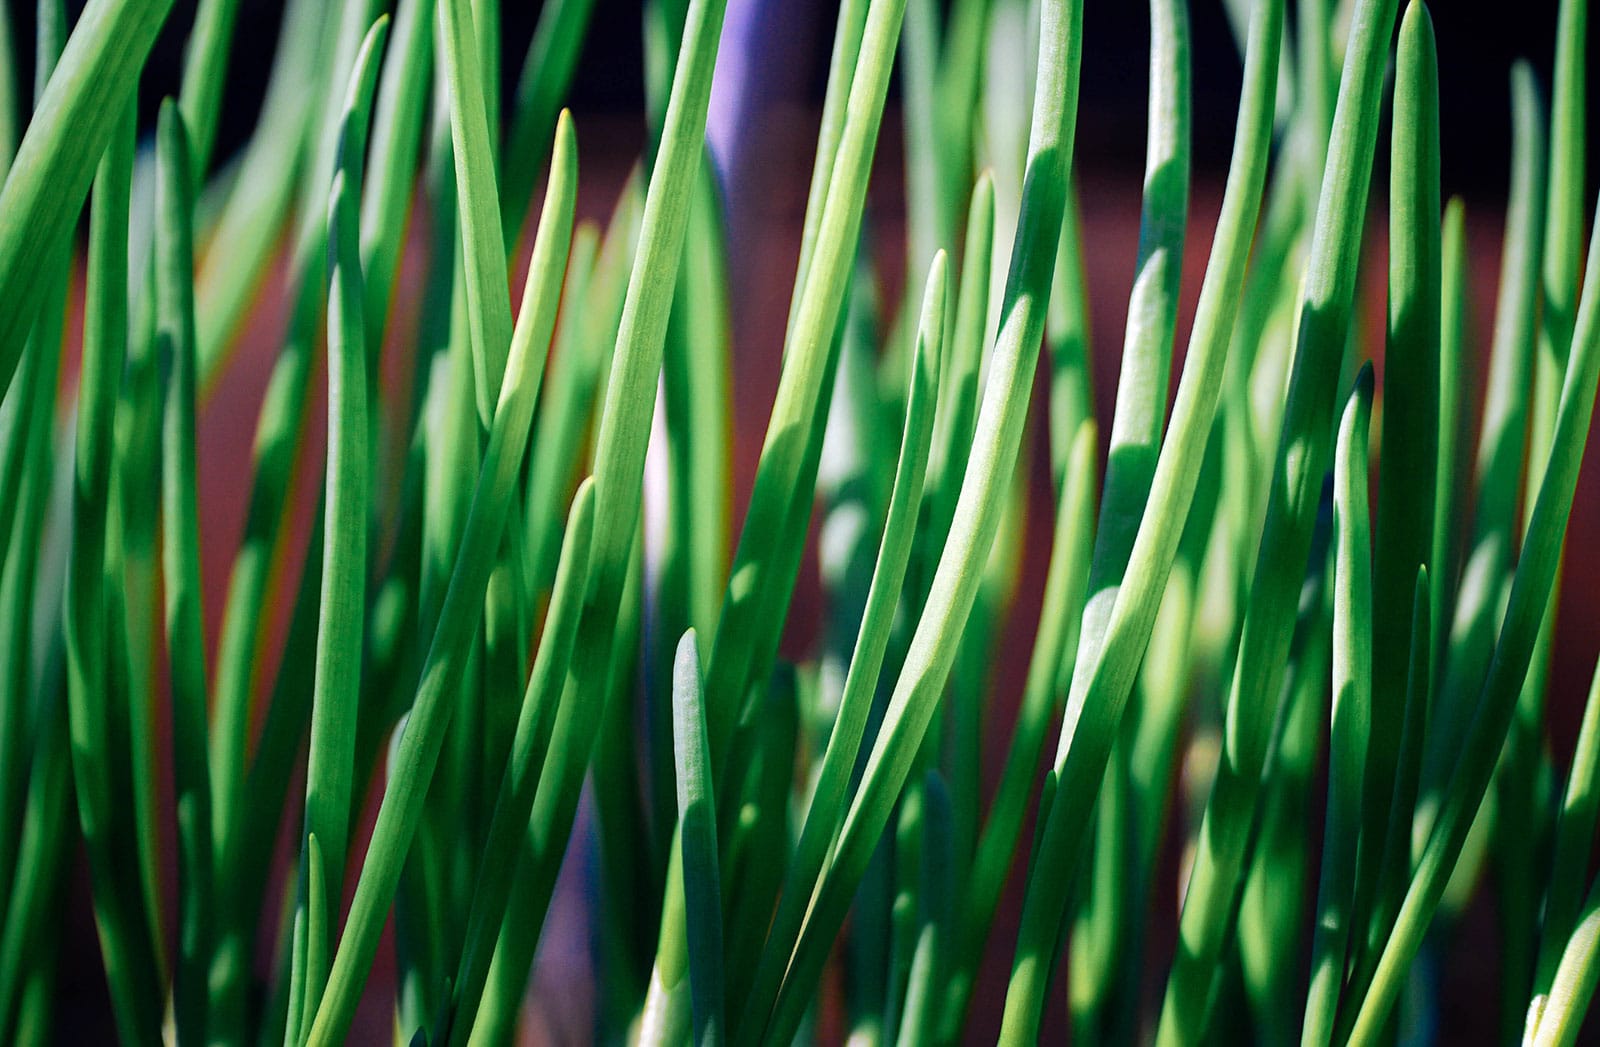 Close-up of scallion (green onion) leaves